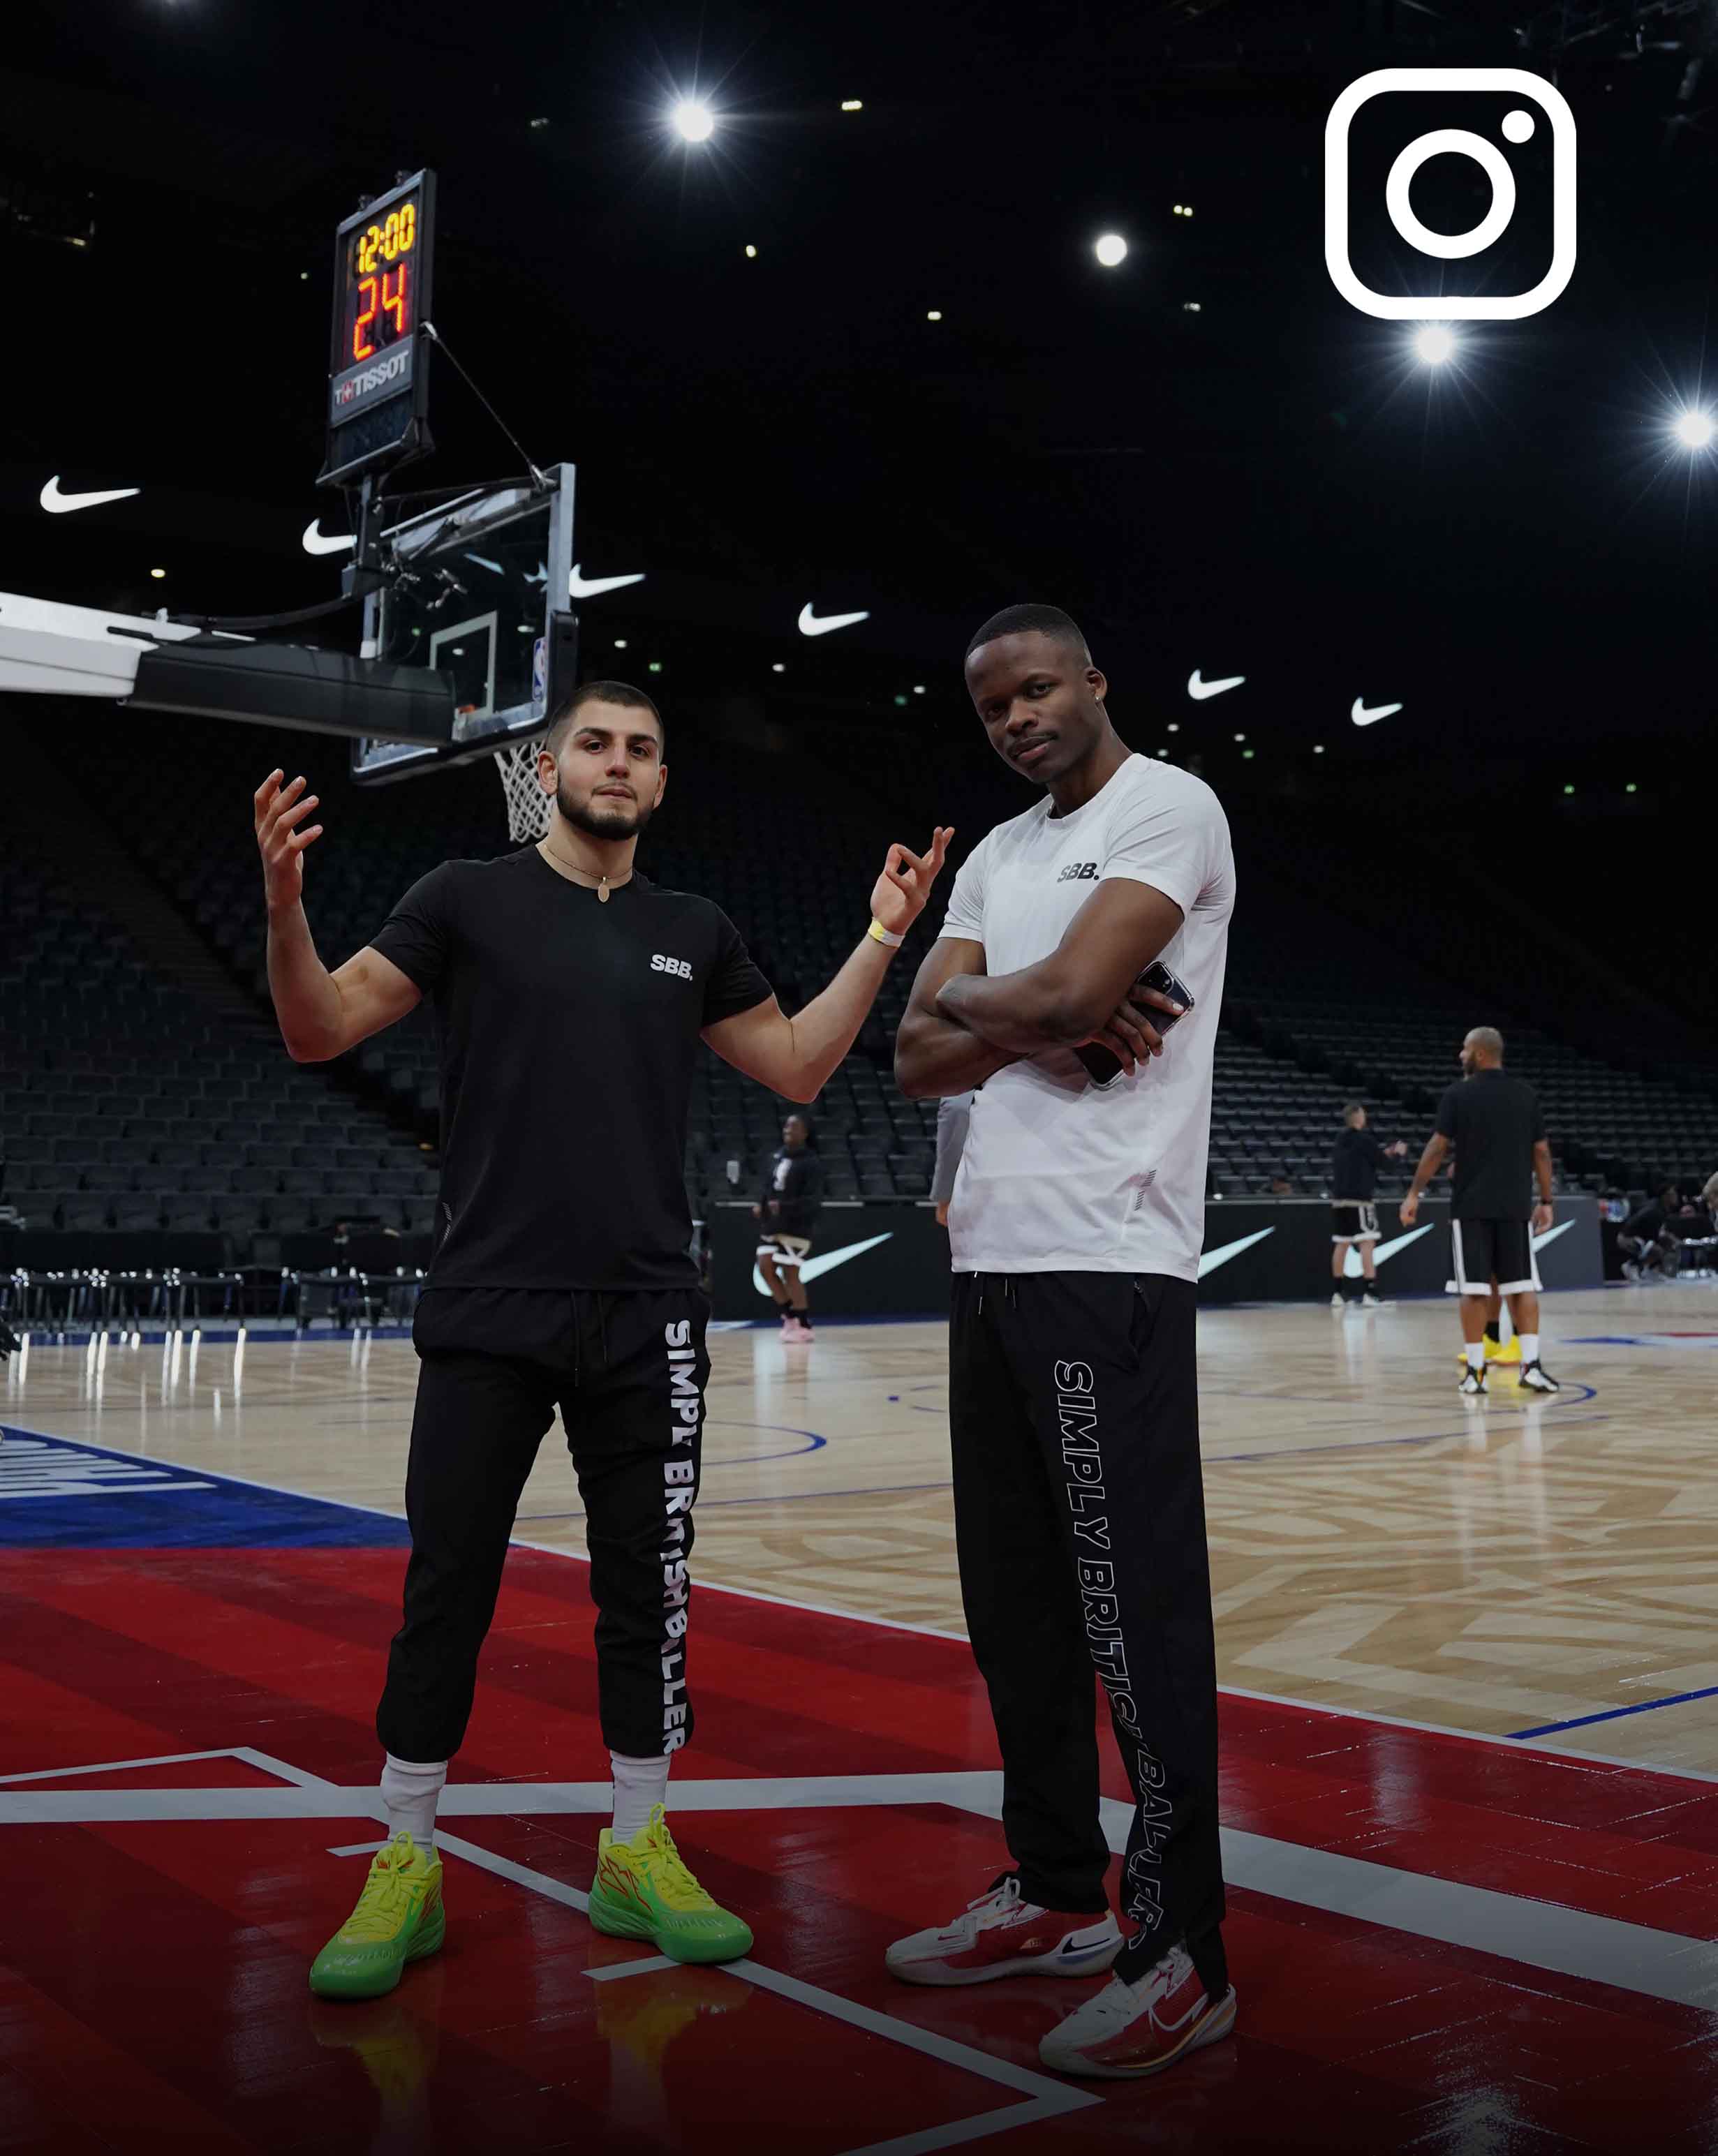 A picture of Behrad and Denzel from Simply British Ballers. (SBB.) standing on the NBA Paris Basketball Court hardwood. With an instagram logo in the top right of the image to inform the viewer this picture is linked with our instagram @sbb_uk